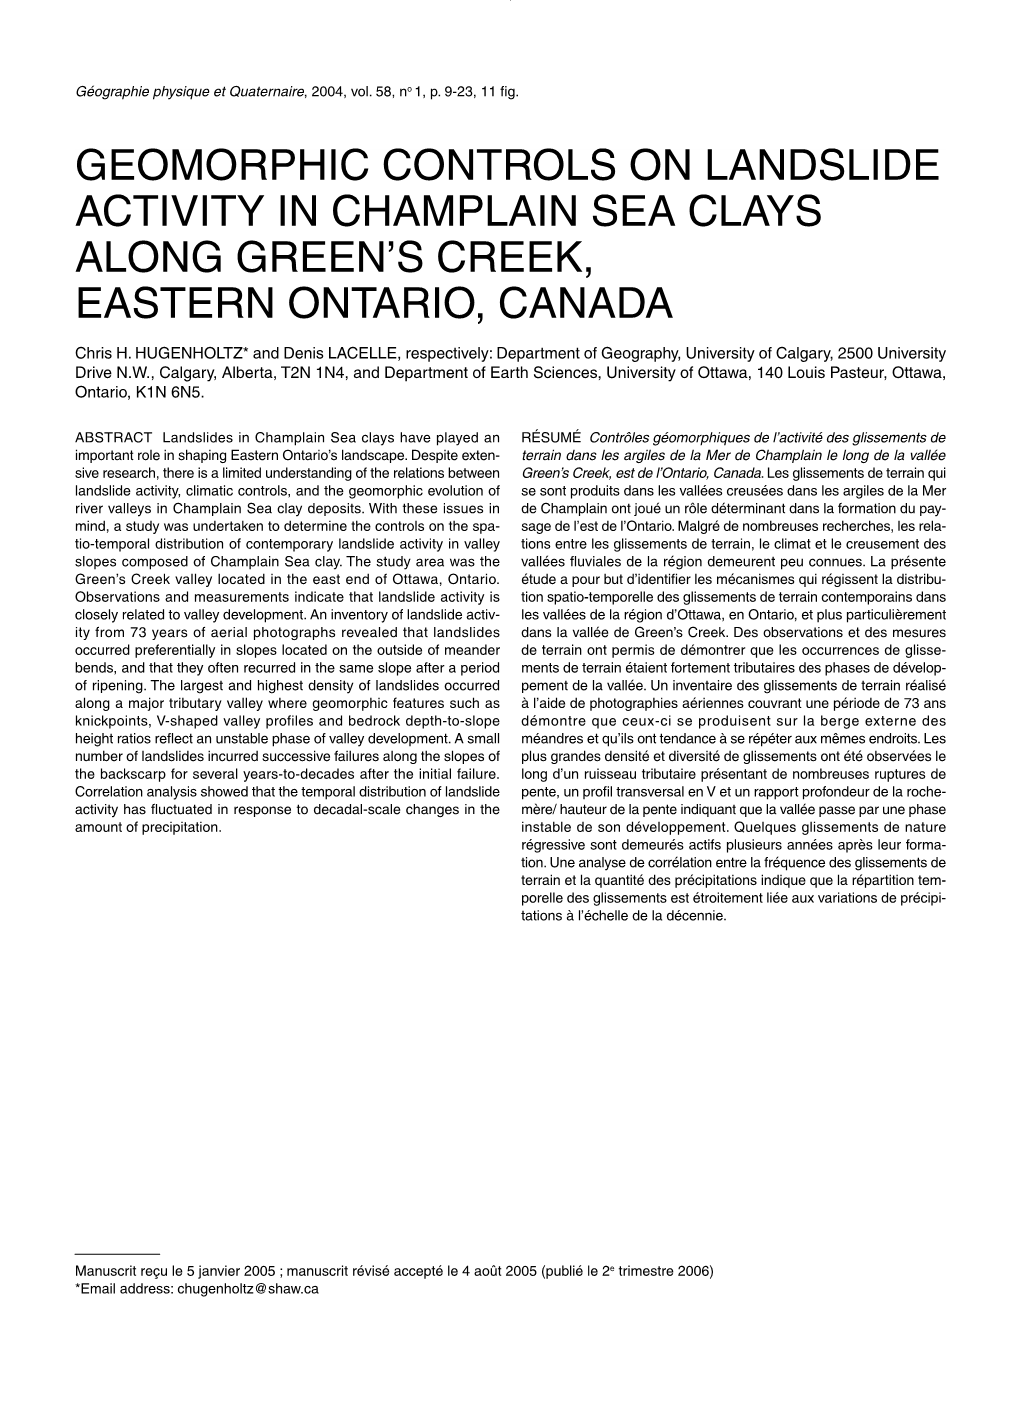 Geomorphic Controls on Landslide Activity in Champlain Sea Clays Along Green’S Creek, Eastern Ontario, Canada